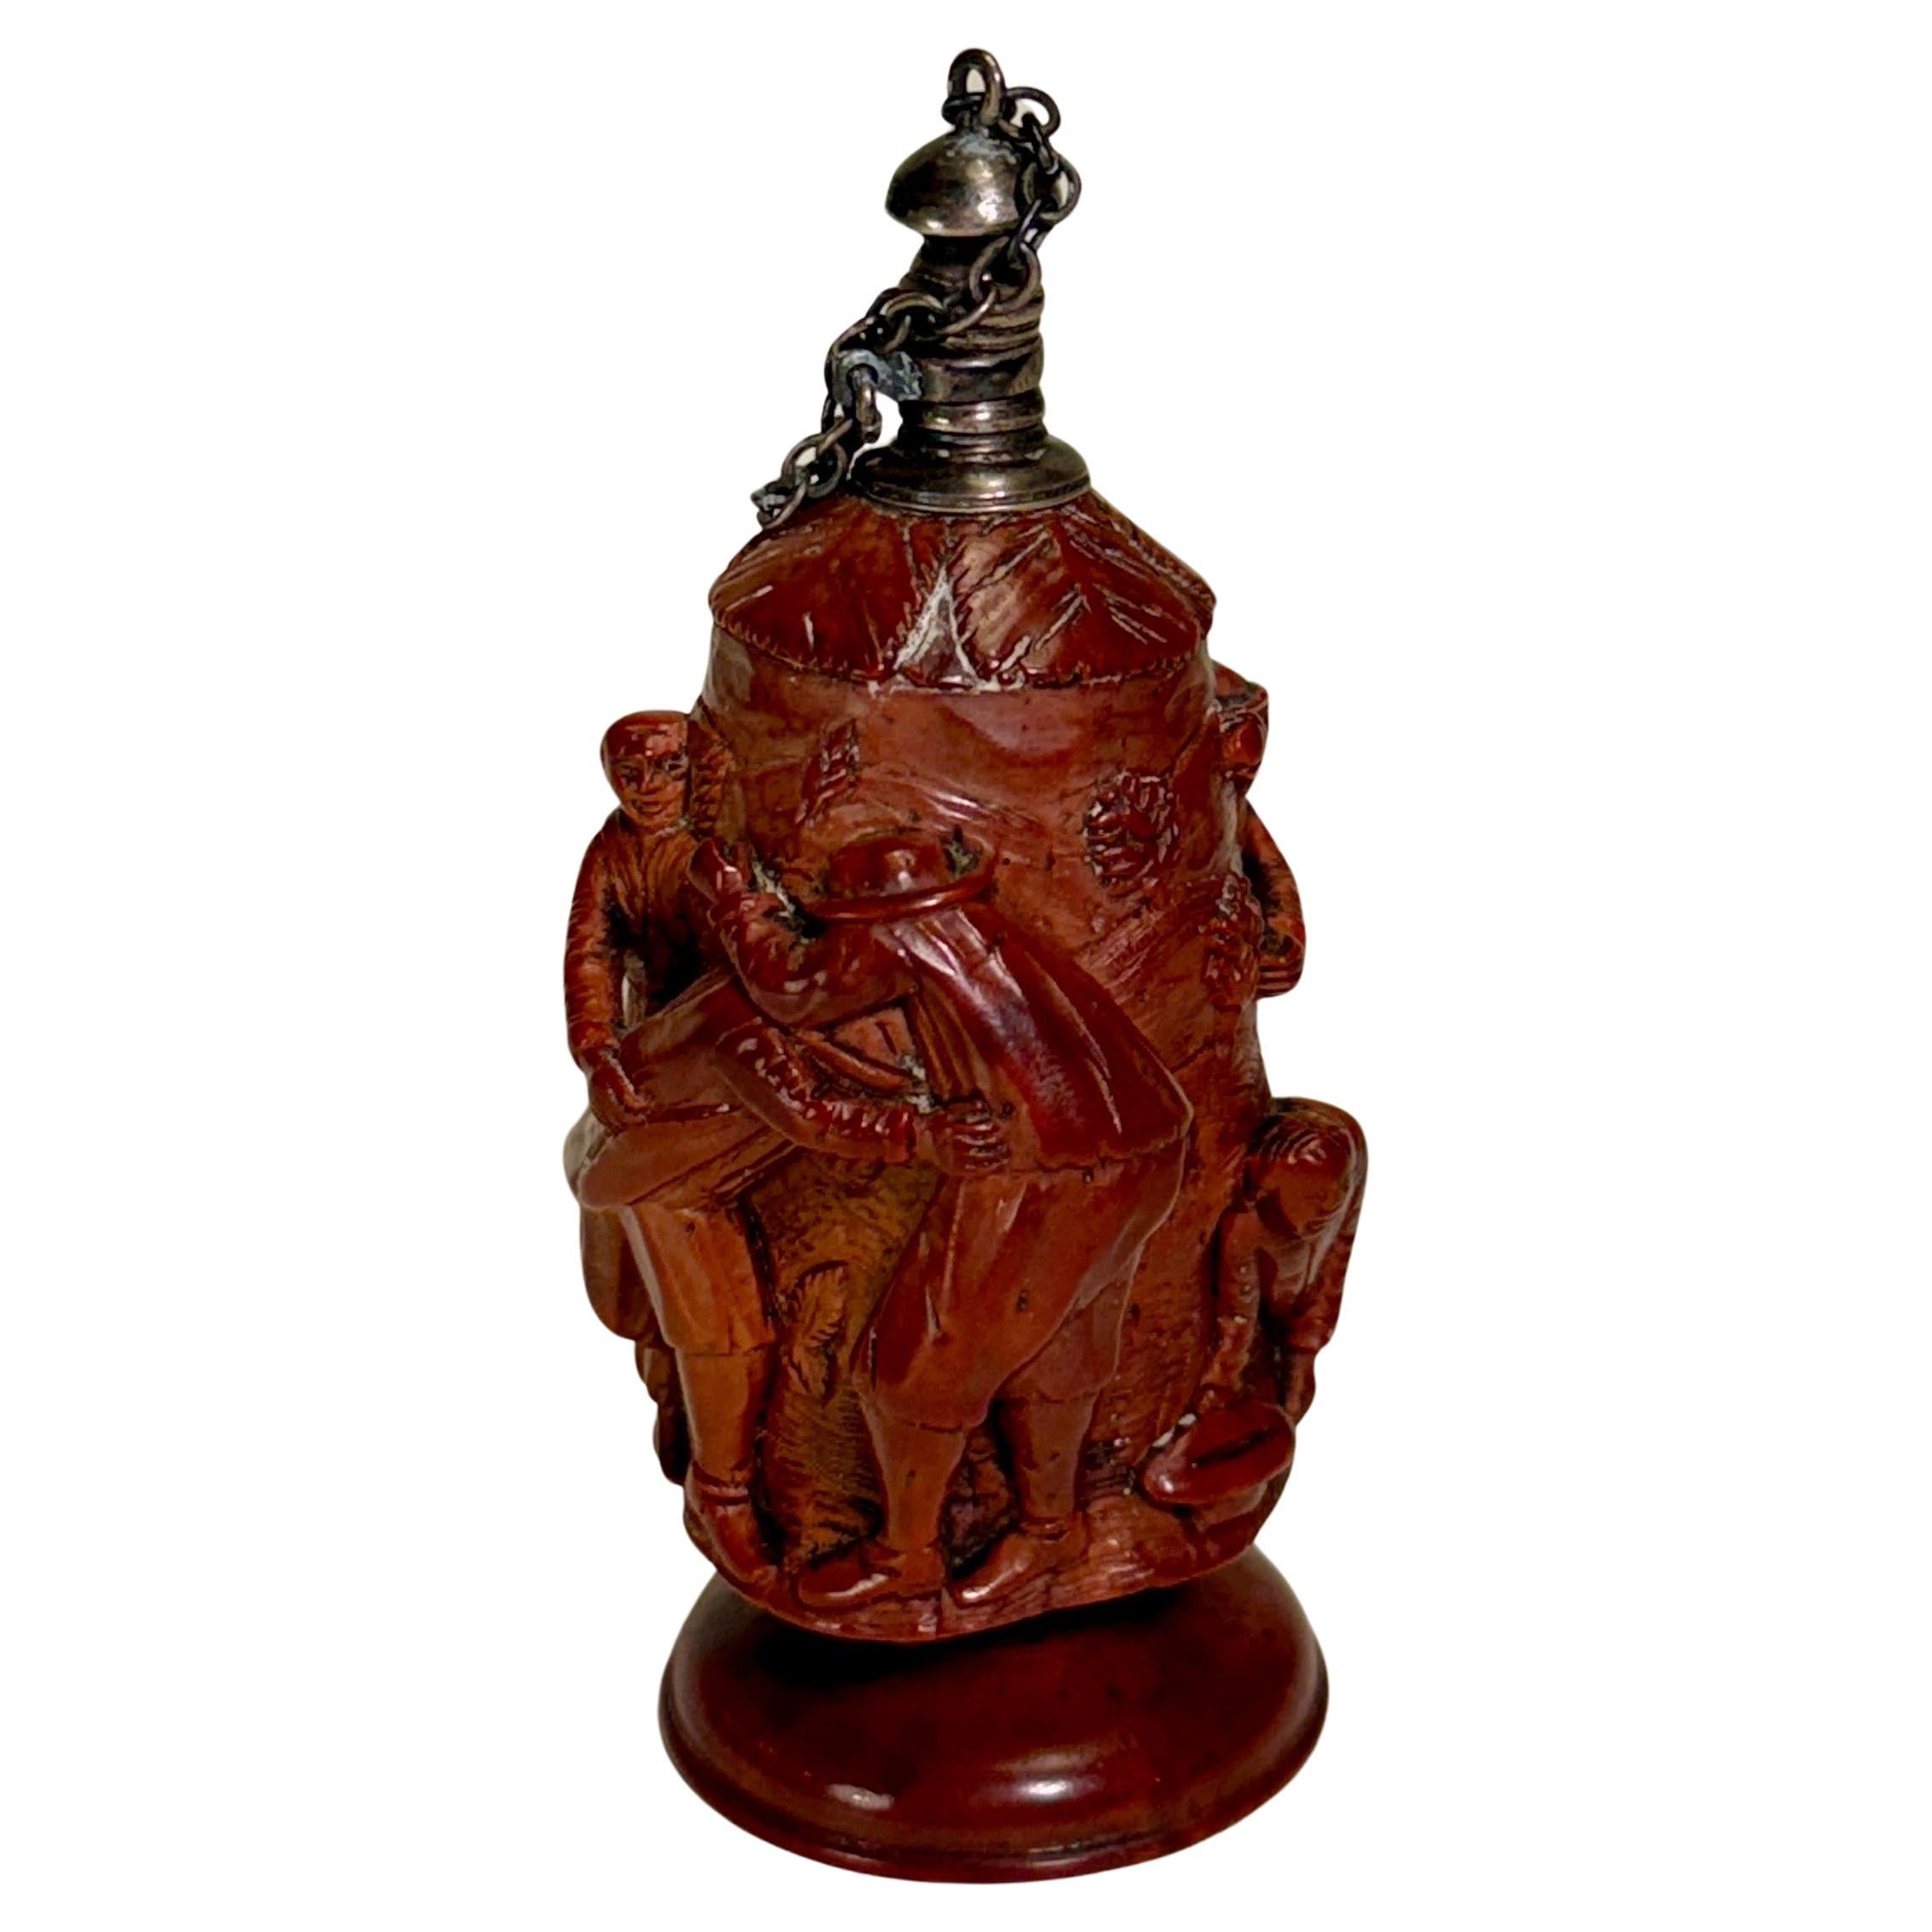 European hand carved boxwood snuff tobacco box or flacon with silver screw cap lid. This impressive snuff box depicts a scene with people as well as a large tree. Certainly a fantastic piece for the collector of these impressive shakers.